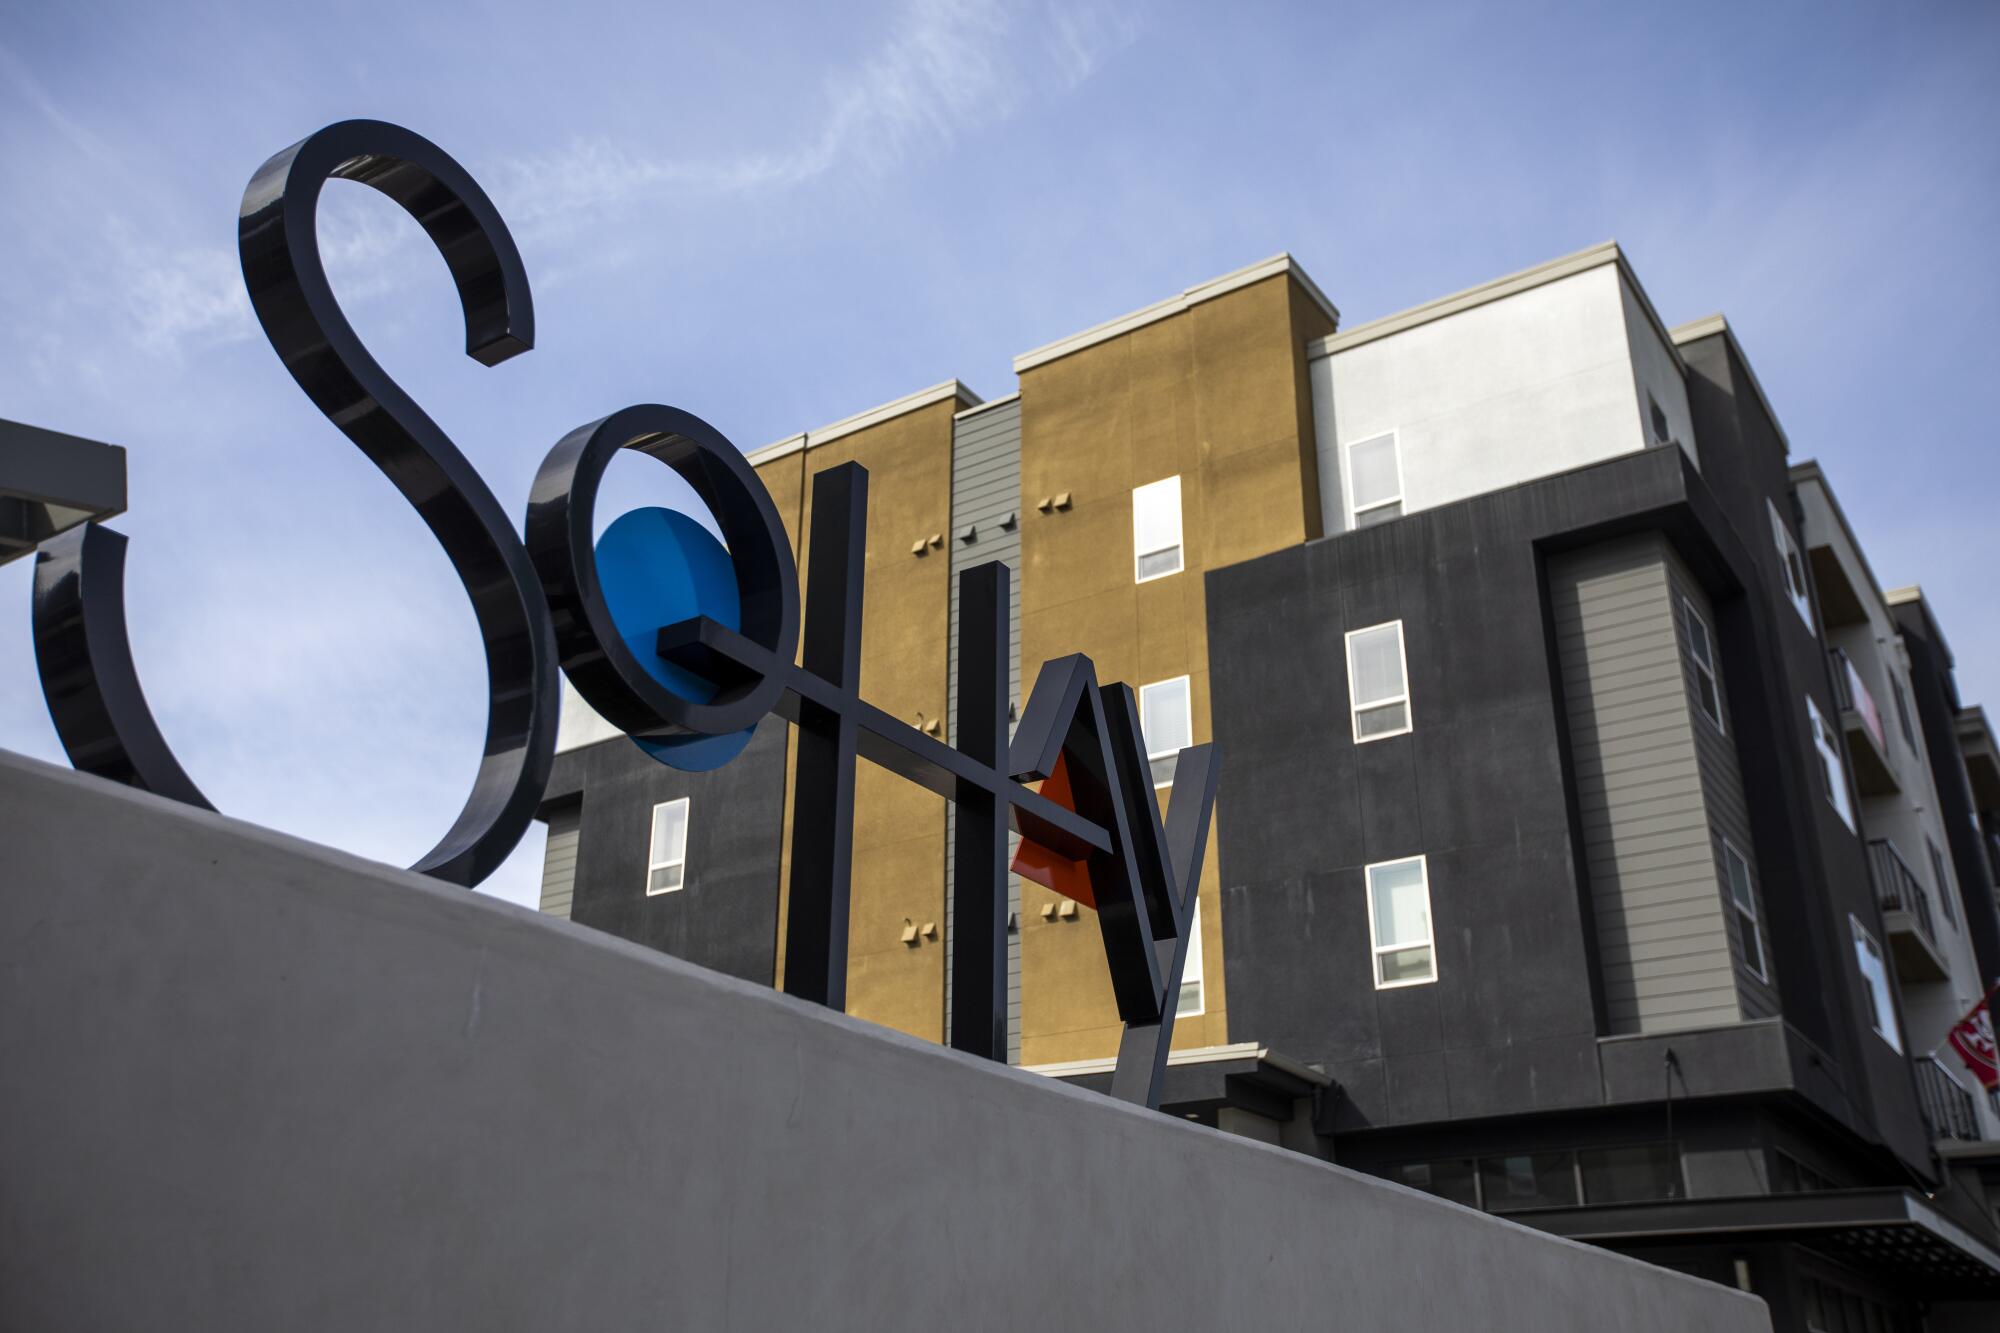 Construction crews are finishing a nearly 500-unit mixed-income apartment and townhouse project called SoHay.